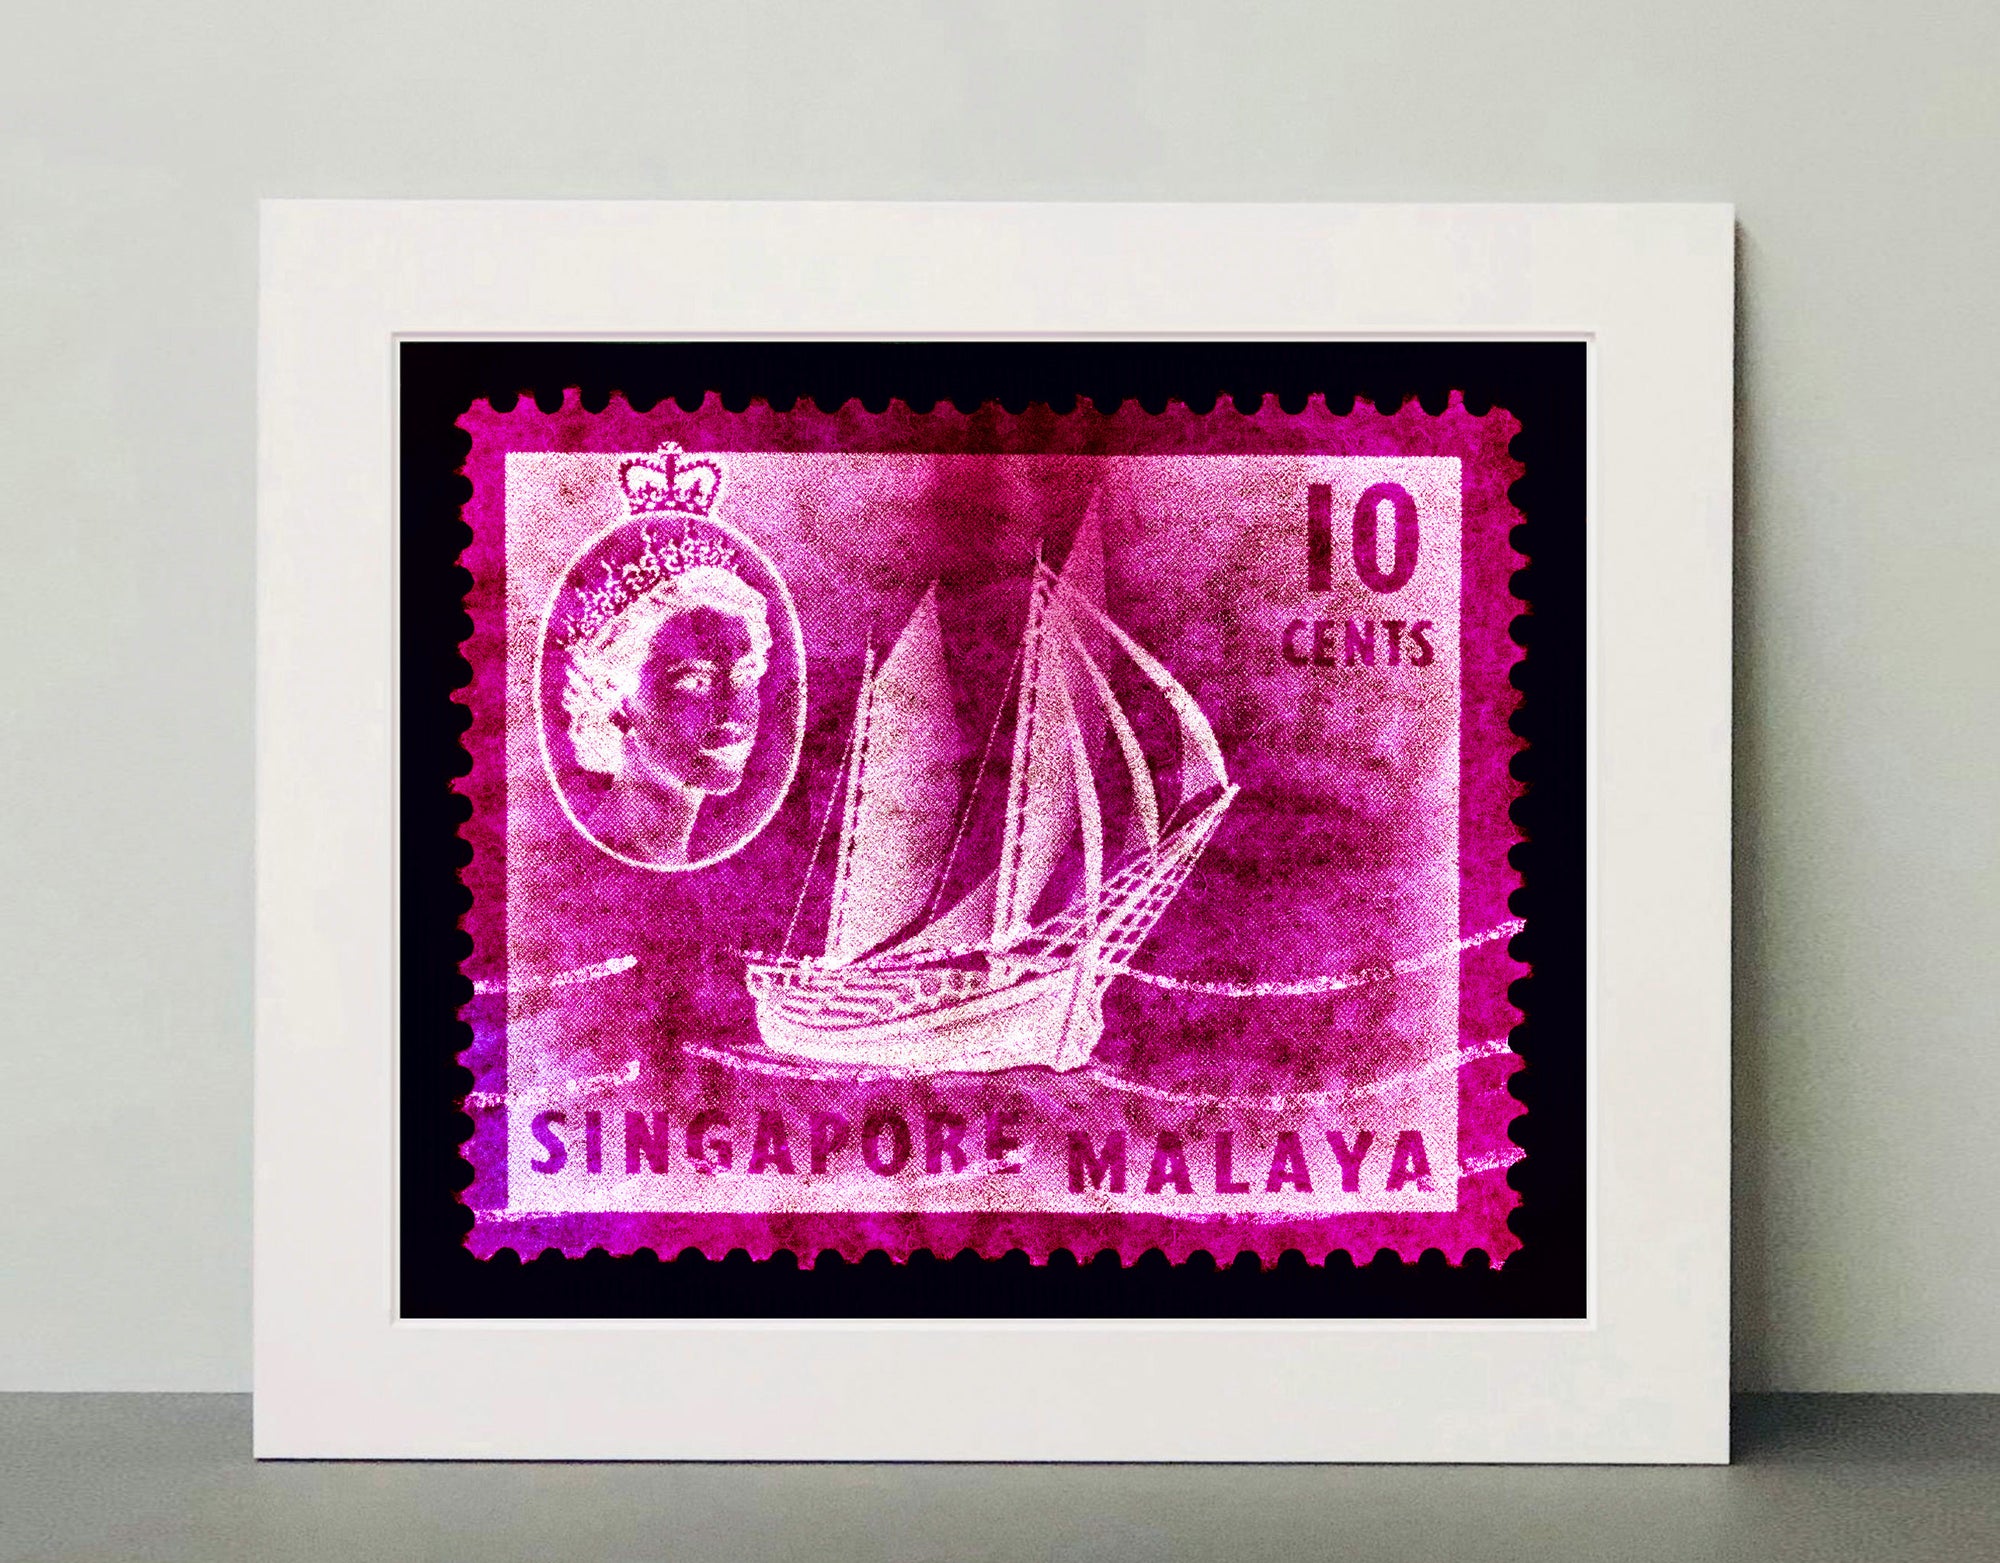 10 cents QEII Ship Series (Magenta). These historic postage stamps that make up the Heidler & Heeps Stamp Collection, Singapore Series “Postcards from Afar” have been given a twenty-first century pop art lease of life. The fine detailed tapestry of the original small postage stamp has been brought to life, made unique by the franking stamp and Heidler & Heeps specialist darkroom process.